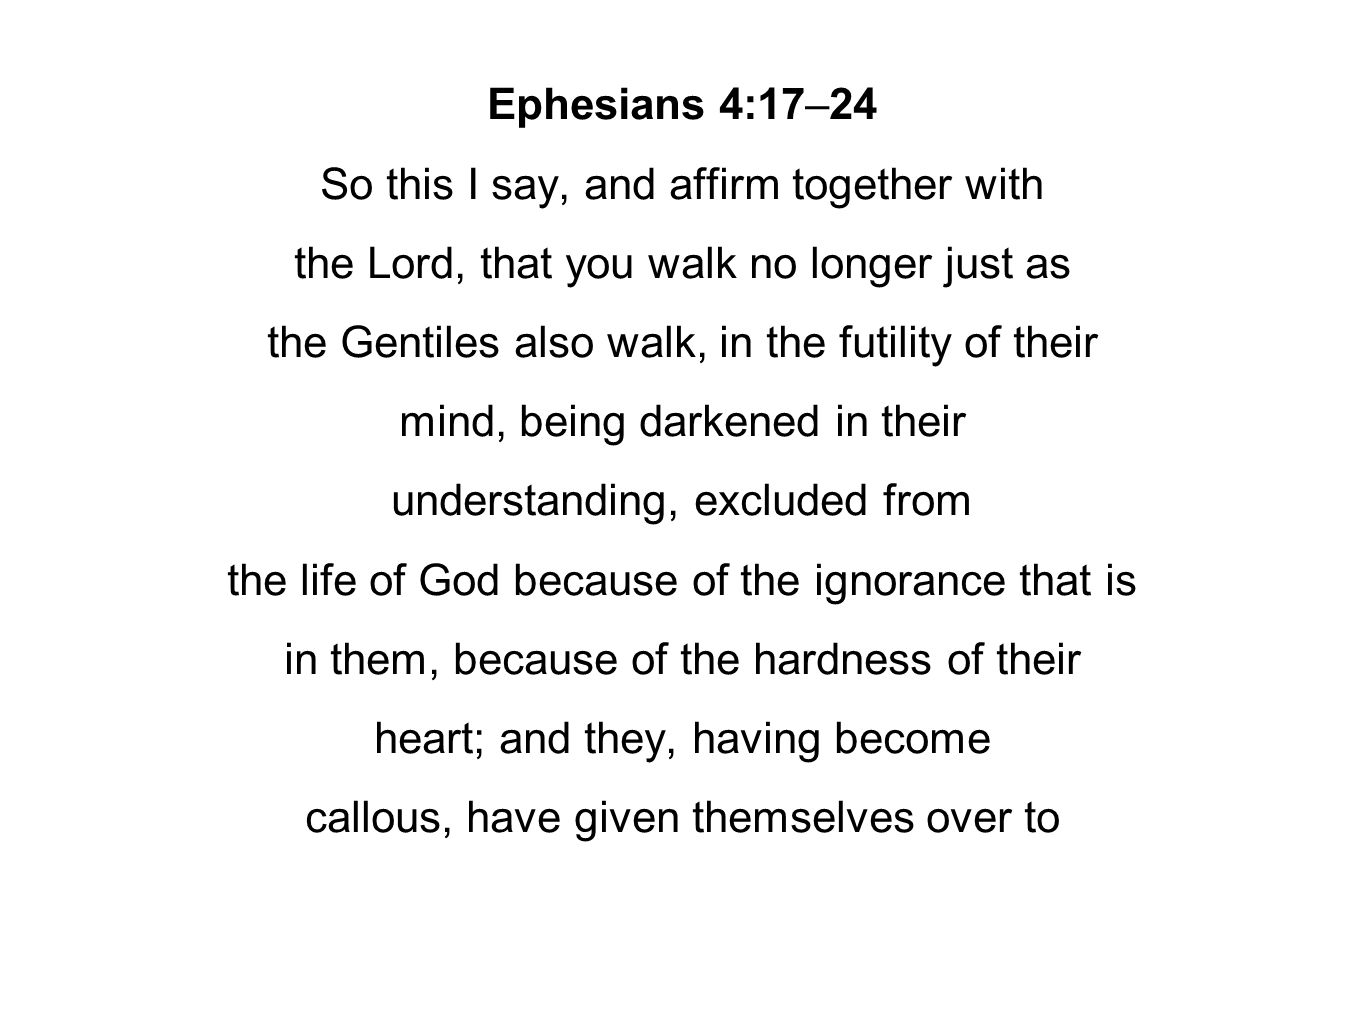 Ephesians 4:17–24 So this I say, and affirm together with the Lord, that you walk no longer just as the Gentiles also walk, in the futility of their mind, being darkened in their understanding, excluded from the life of God because of the ignorance that is in them, because of the hardness of their heart; and they, having become callous, have given themselves over to